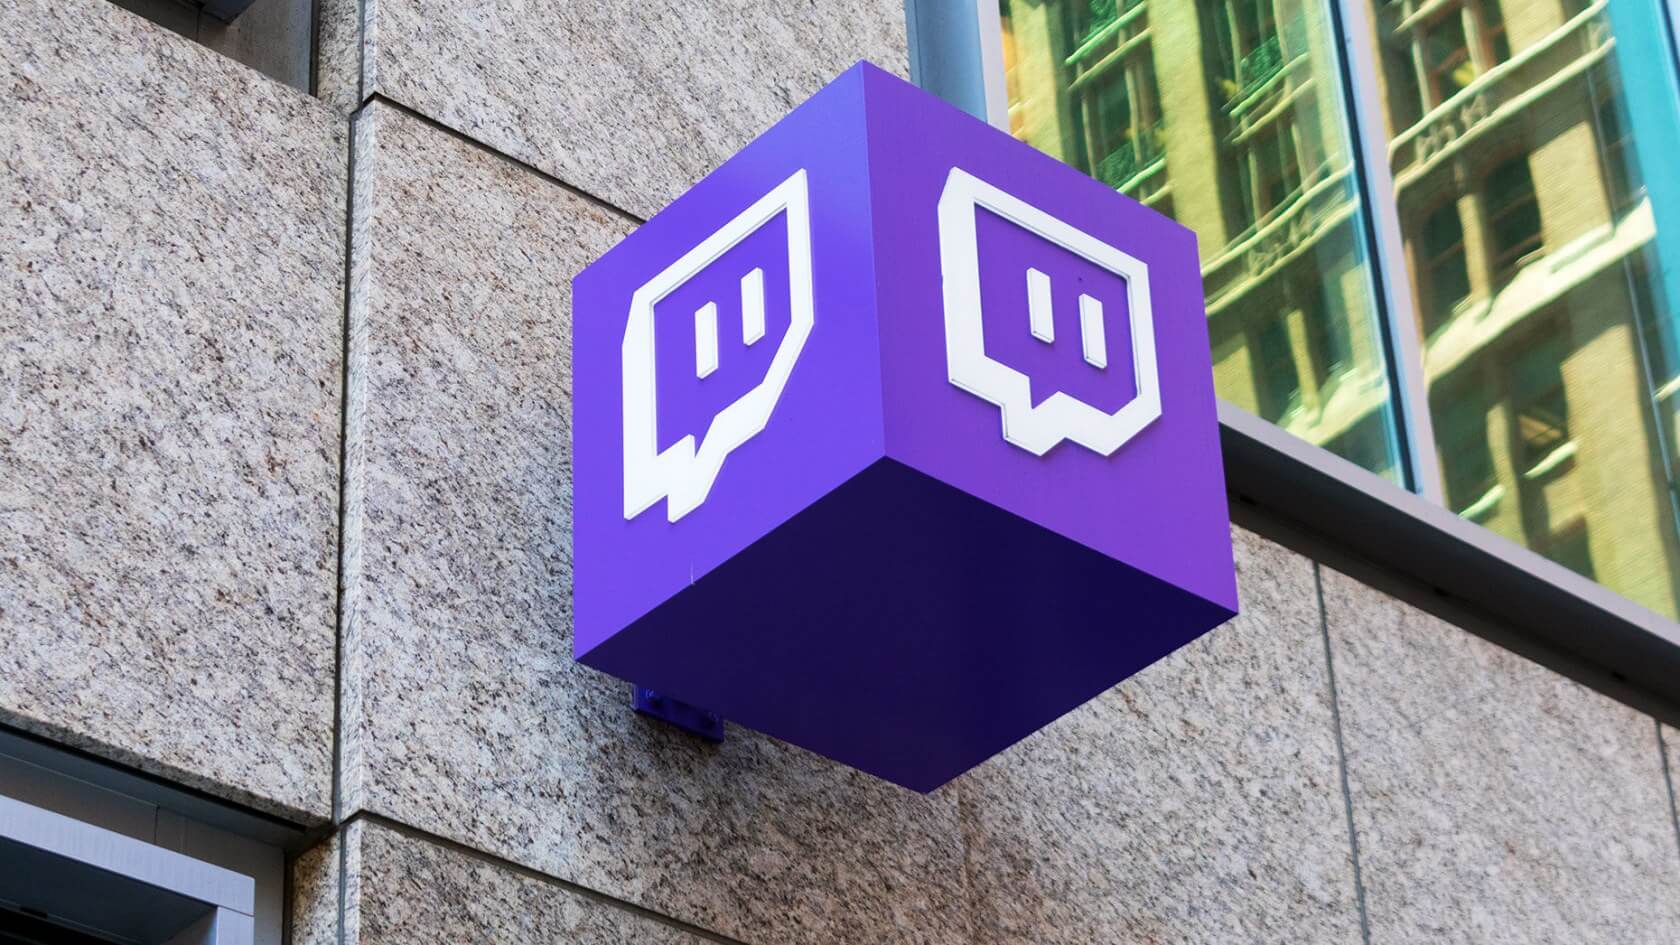 Amazon could sell Twitch's streaming technology to other corporations